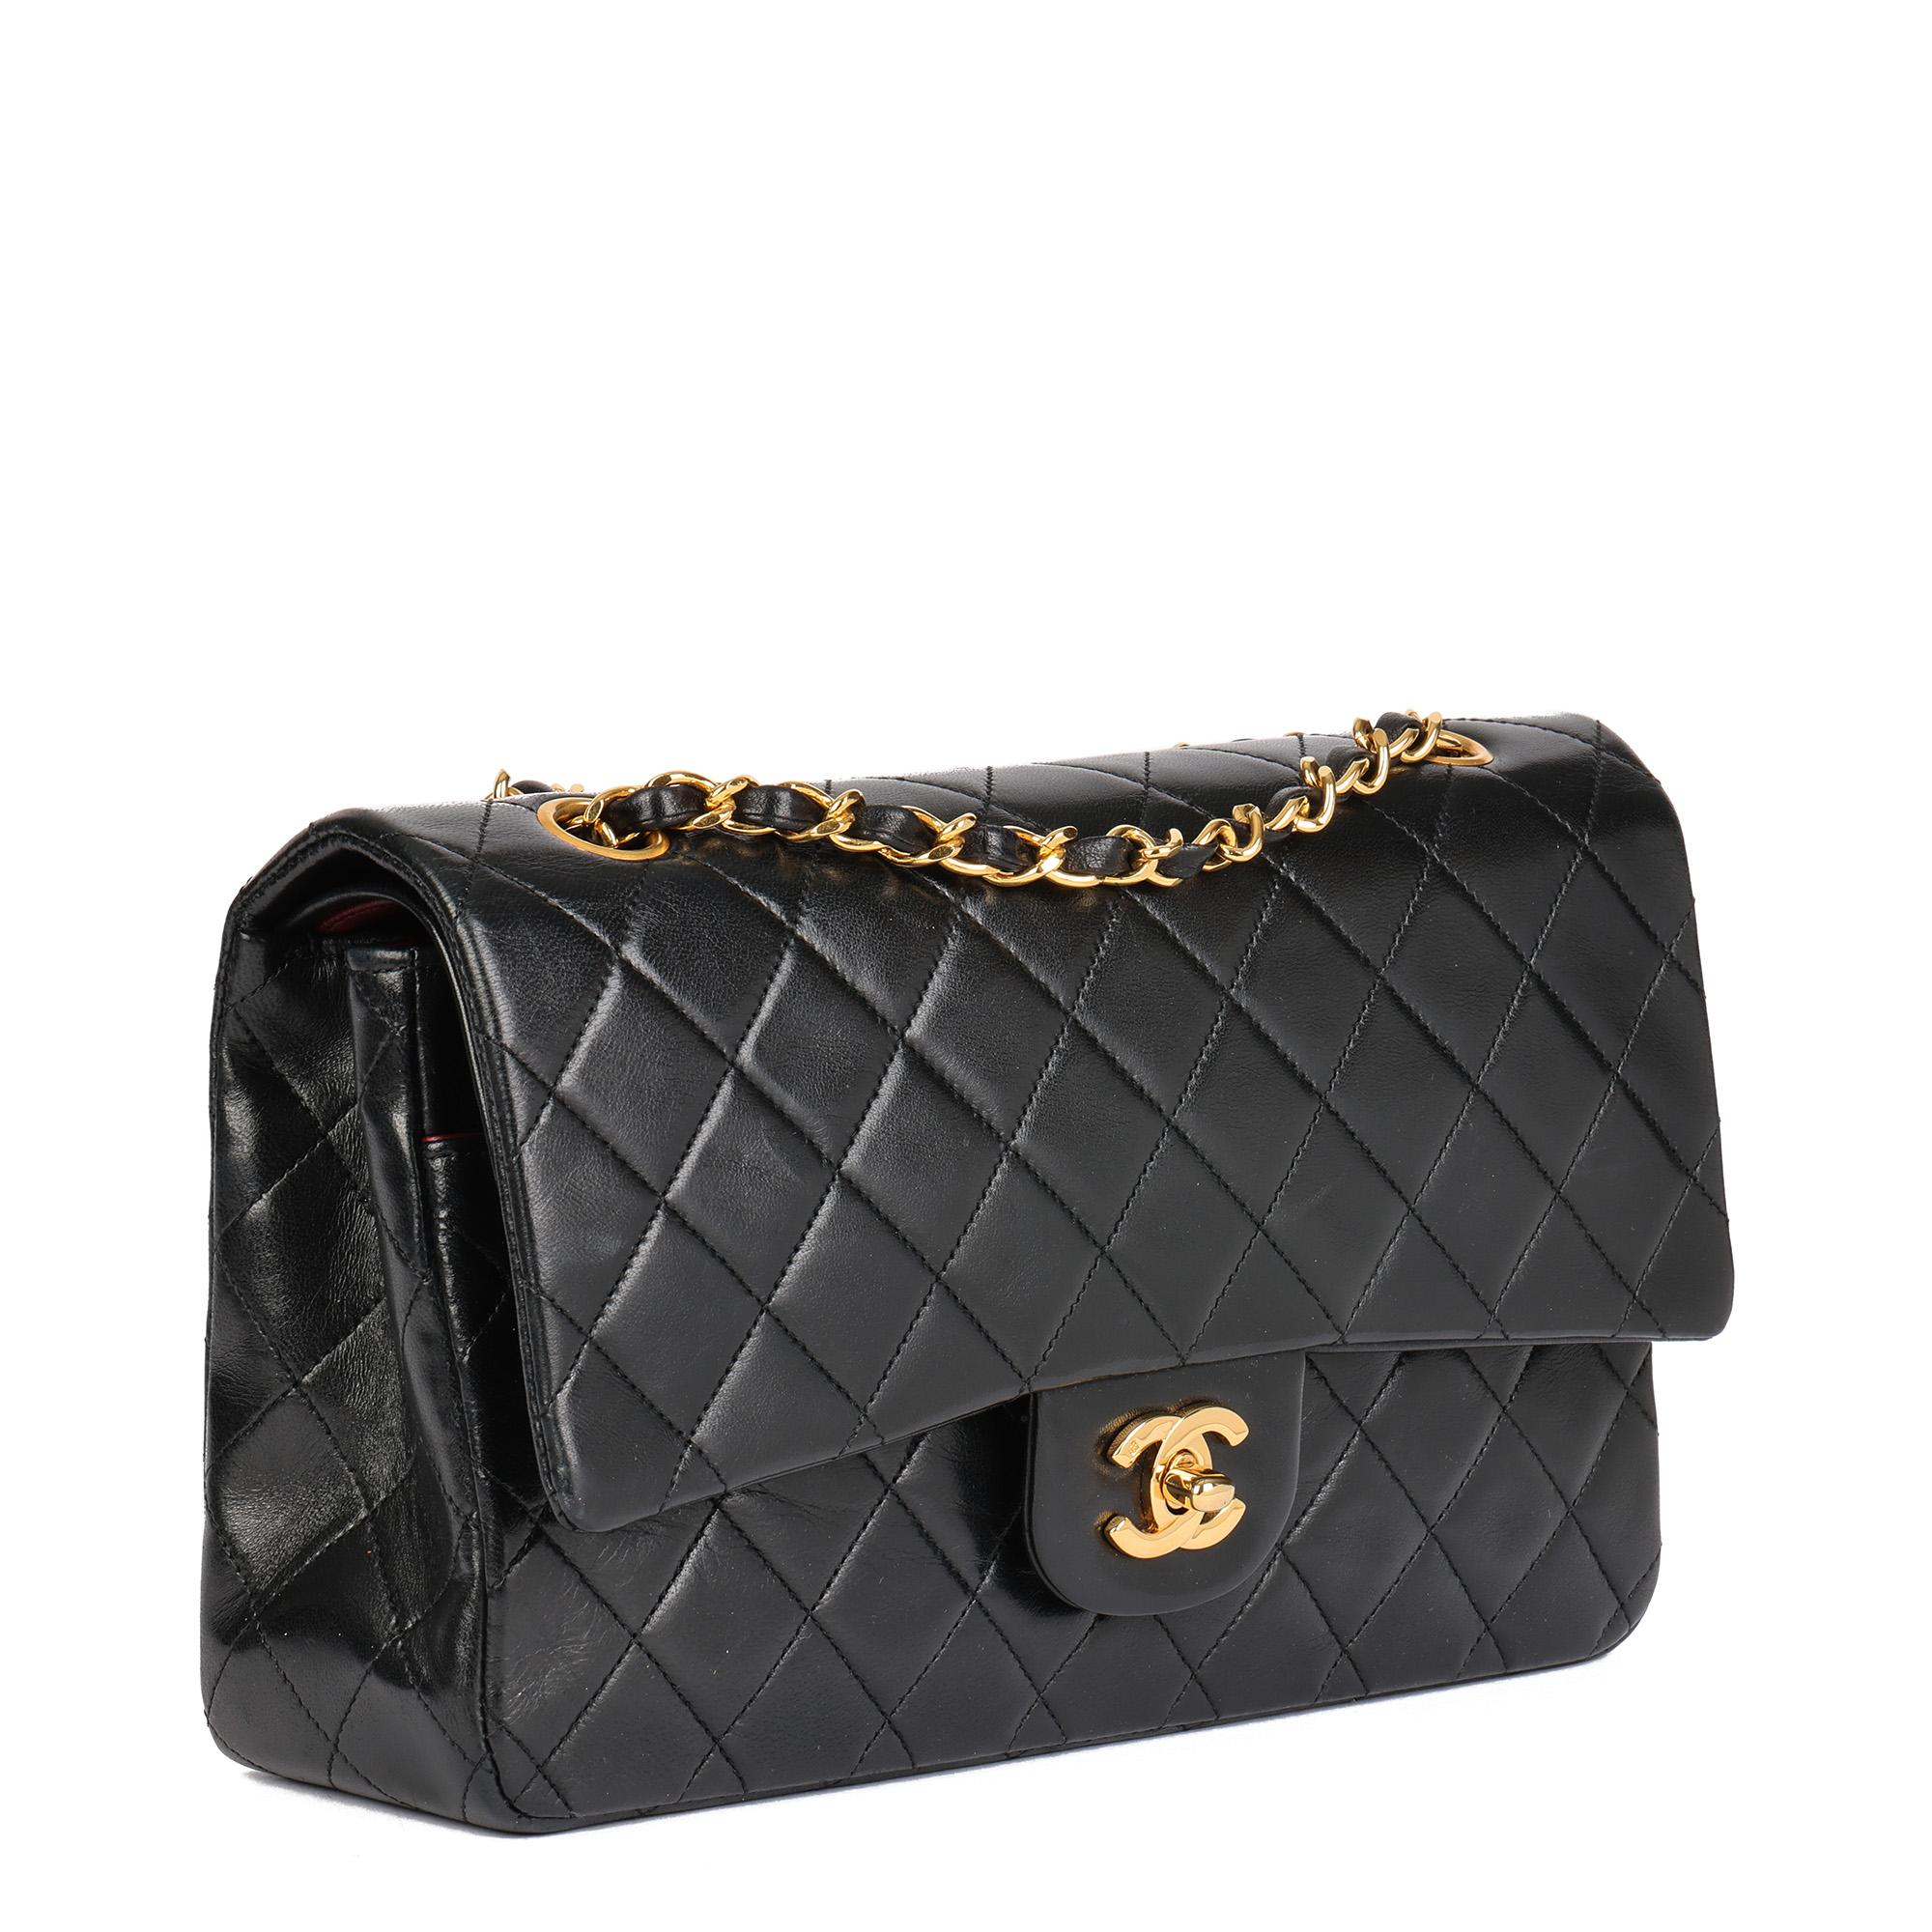 CHANEL
Black Quilted Lambskin Vintage Medium Classic Double Flap Bag 

Serial Number: 1397089
Age (Circa): 1989
Accompanied By: Chanel Dust Bag, Authenticity Card
Authenticity Details: Authenticity Card, Serial Sticker (Made in France)
Gender: